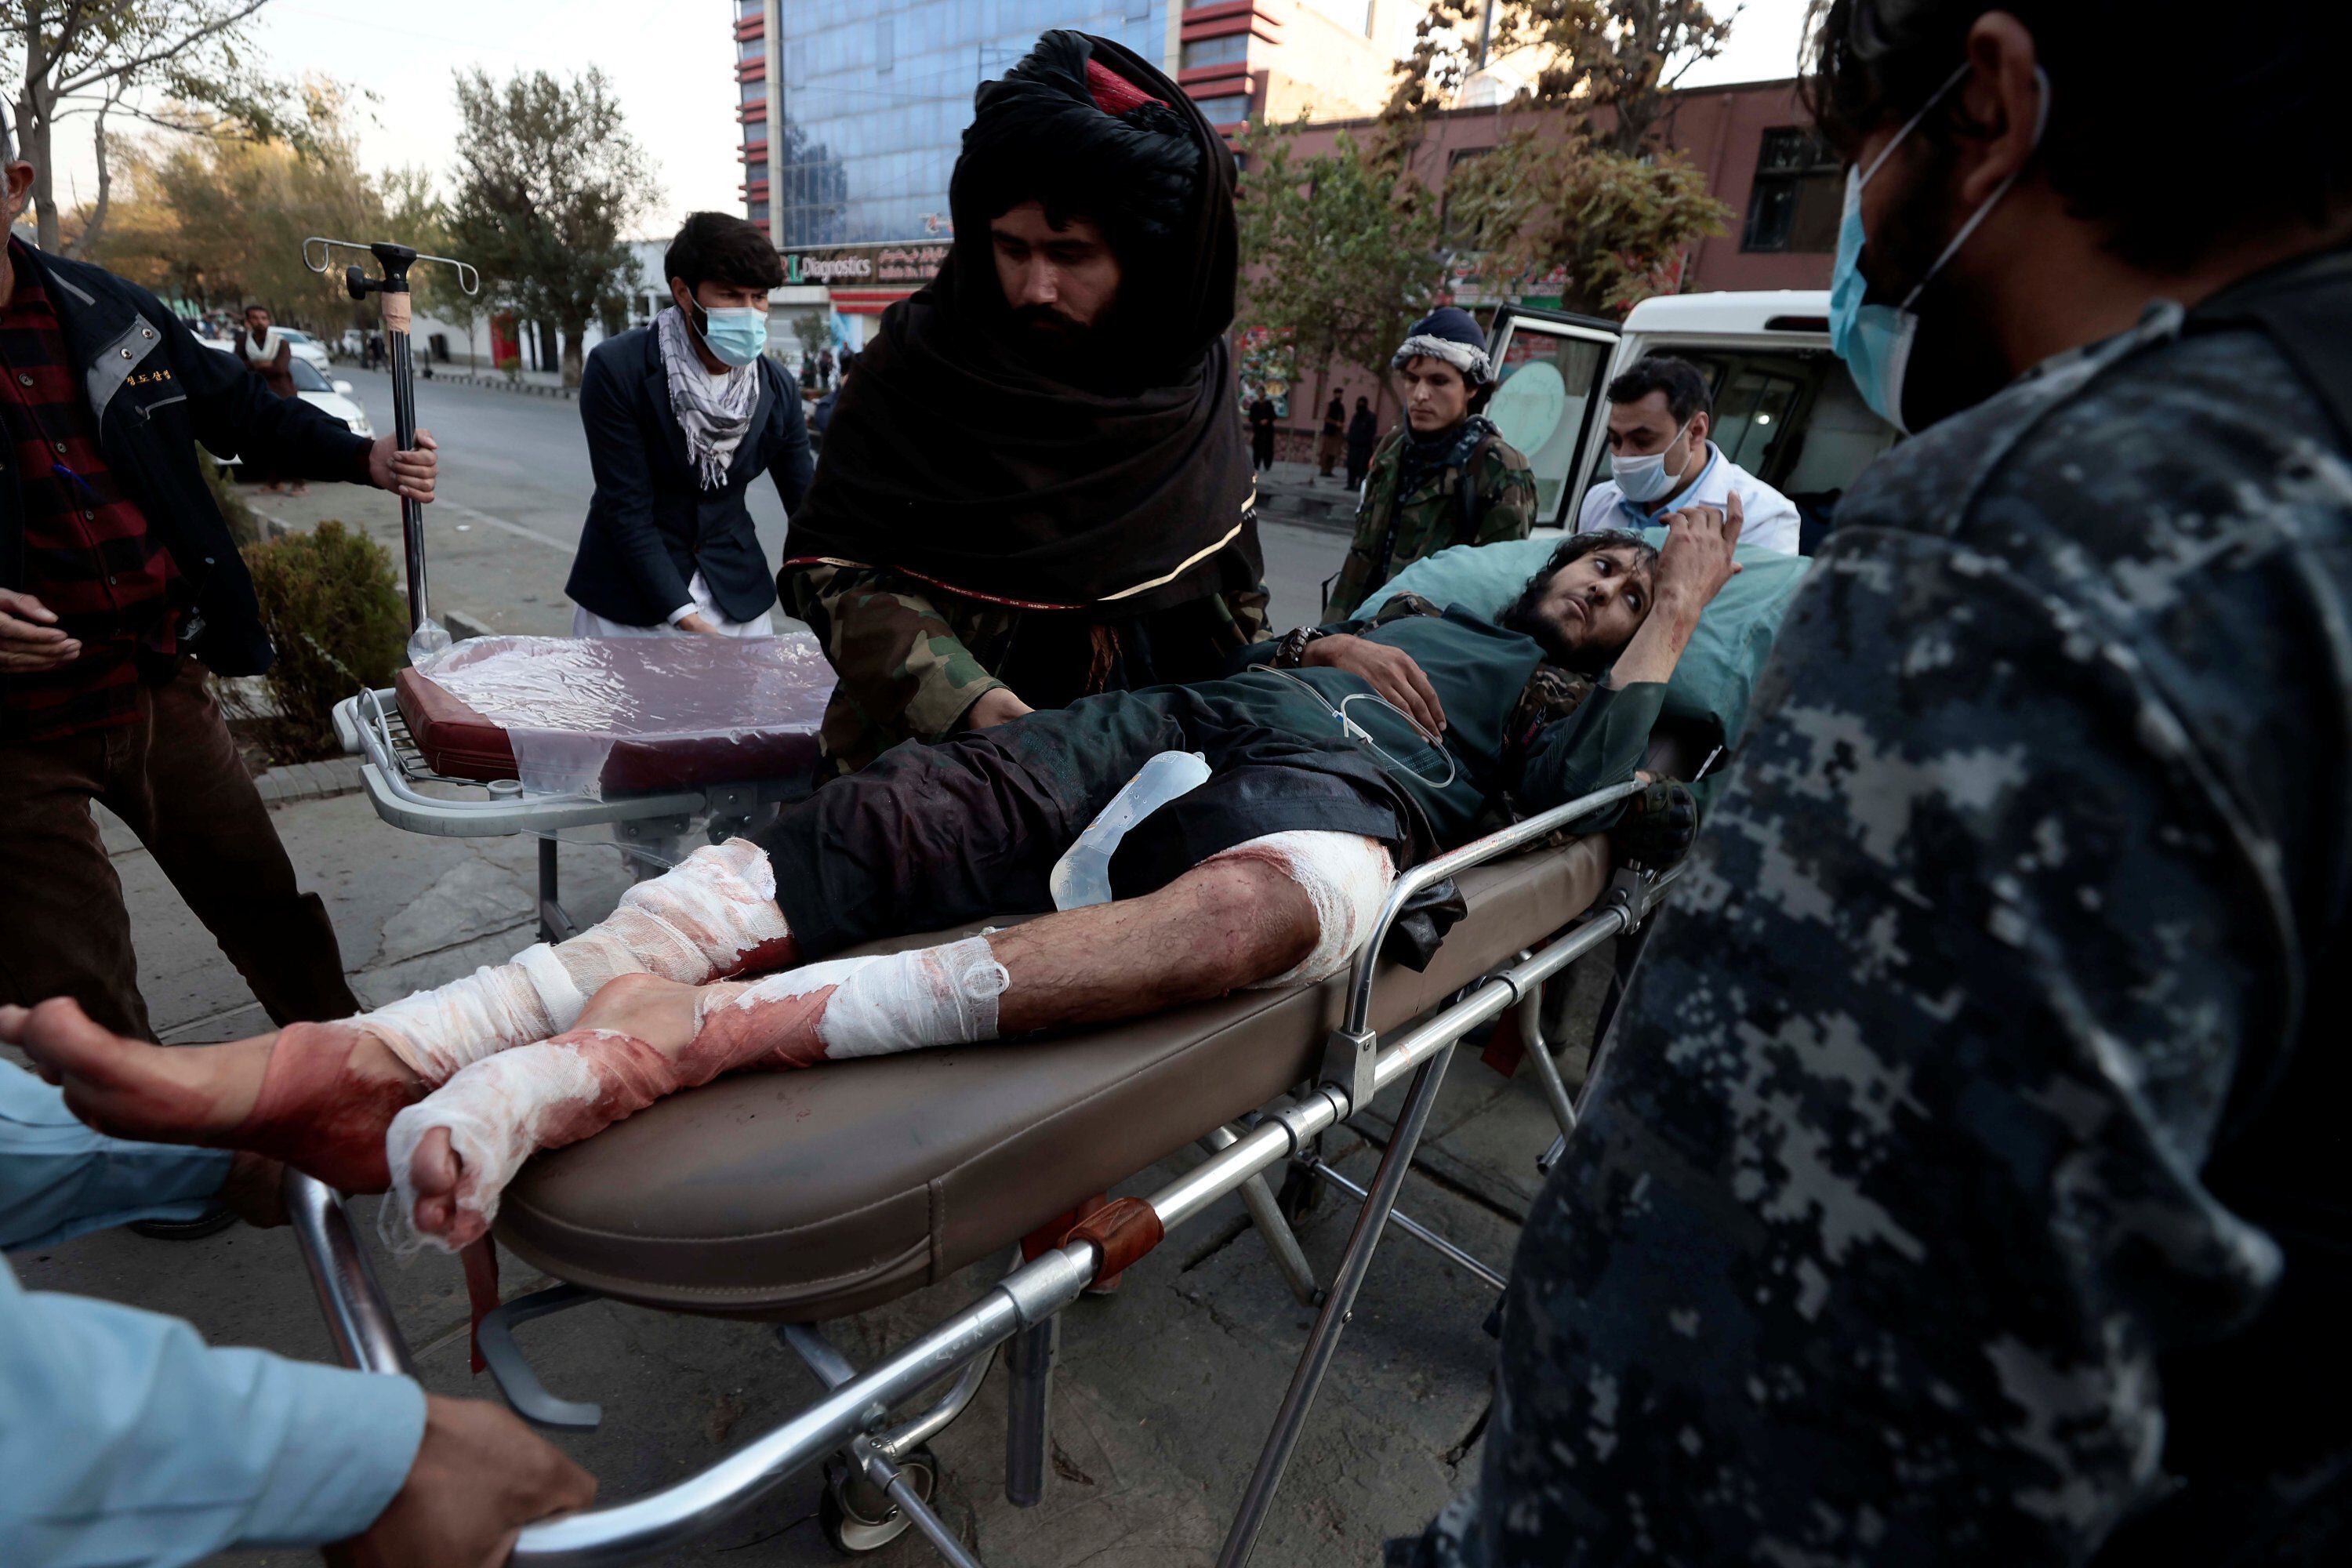 Evacuation of the wounded at the Kabul military hospital attacked by ISIS-K on 11/2/21